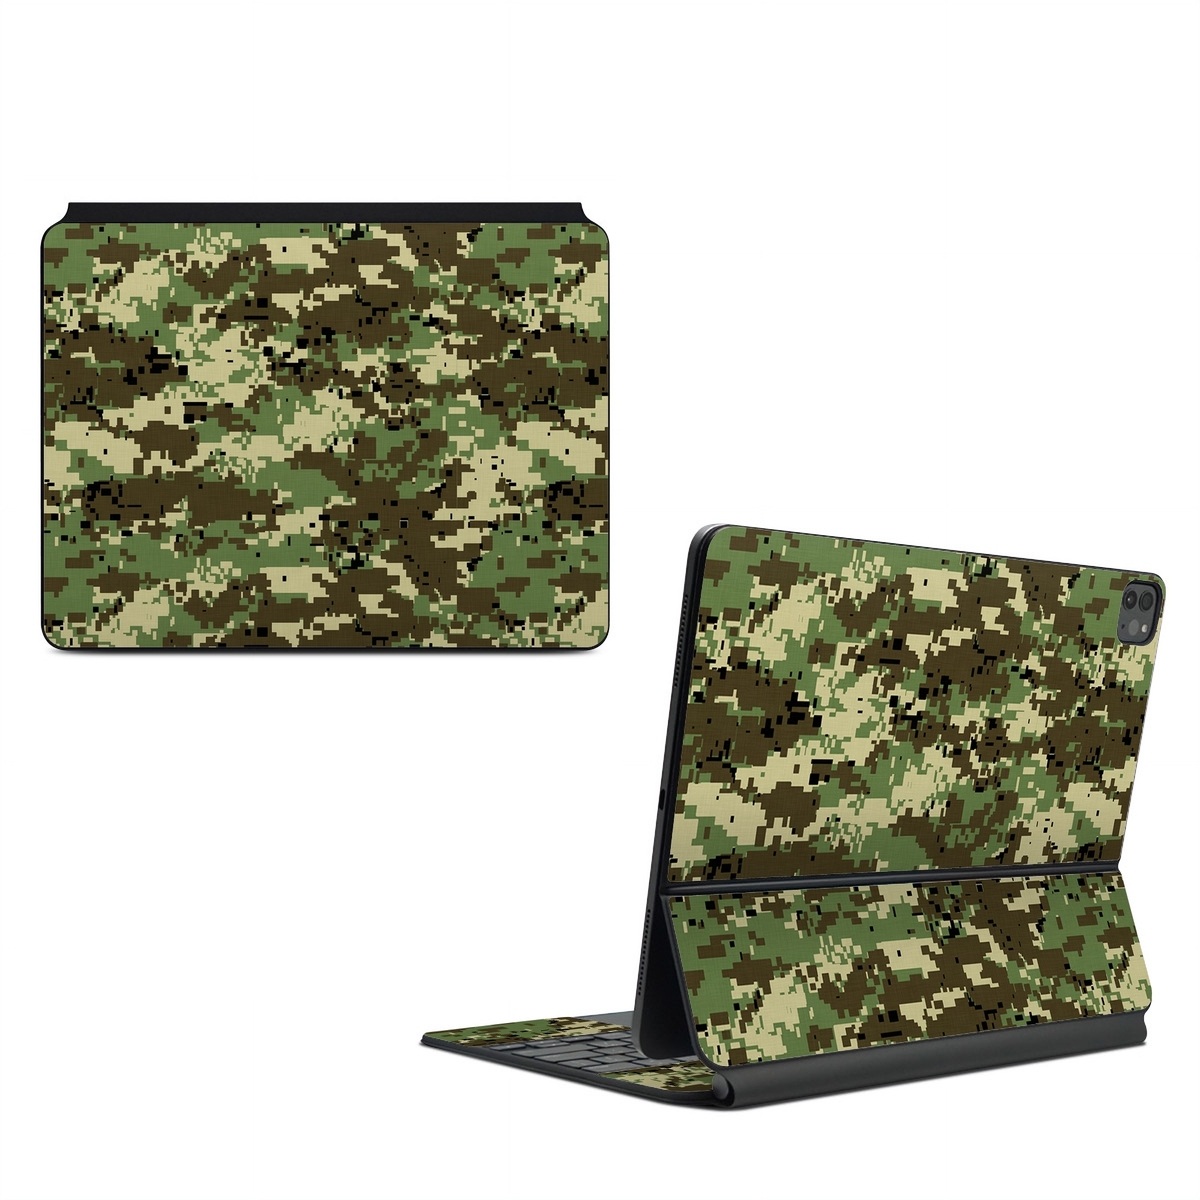 Magic Keyboard for iPad Series Skin design of Military camouflage, Pattern, Camouflage, Green, Uniform, Clothing, Design, Military uniform, with black, gray, green colors